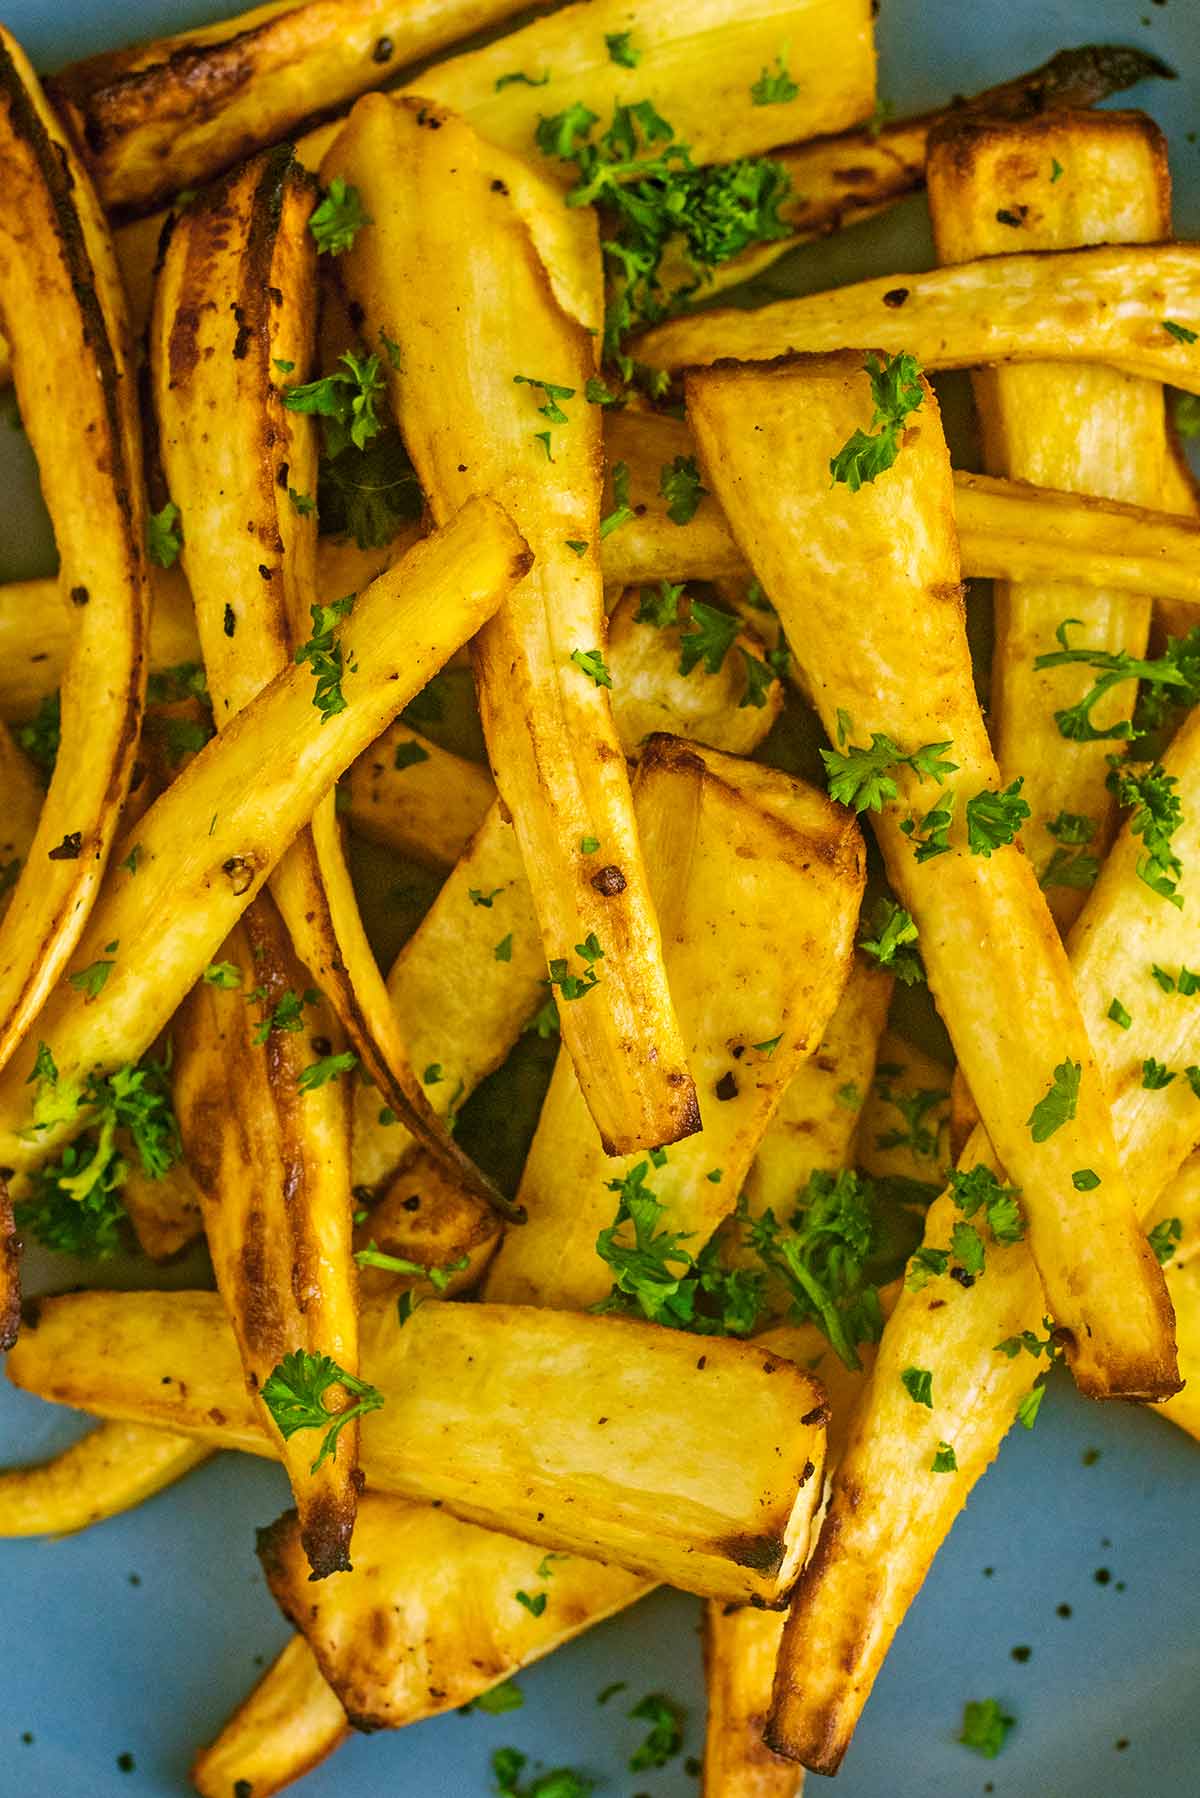 Cooked parsnips with chopped parsley sprinkled over them.